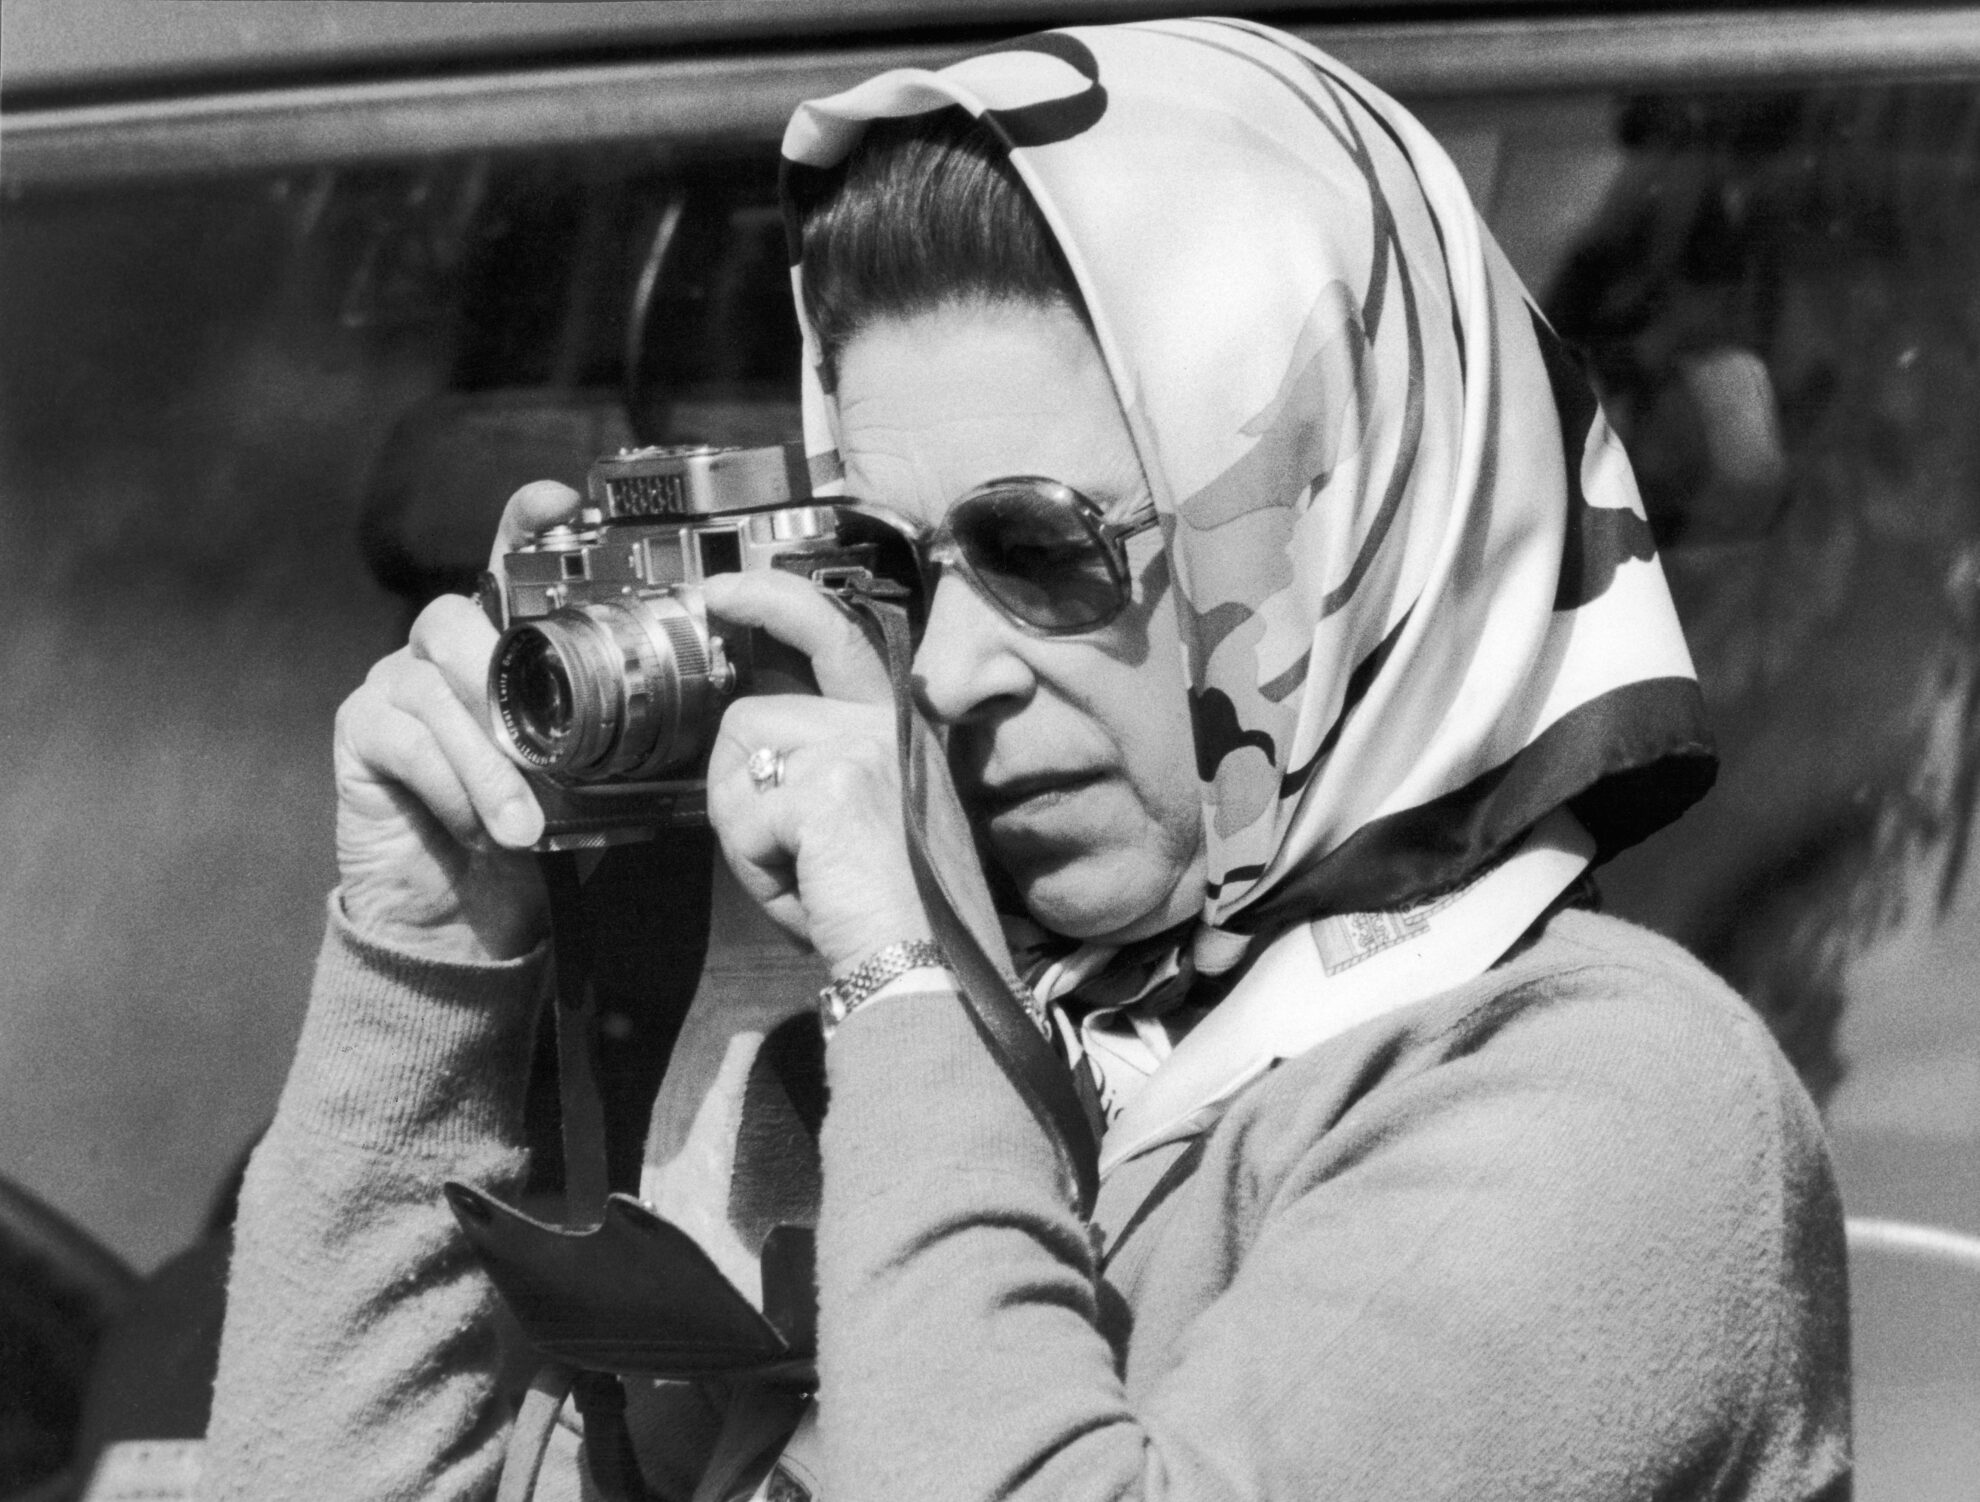 Her Majesty Queen Elizabeth II taking a picture at the Royal Windsor Horse Trials. 174th May 1982.